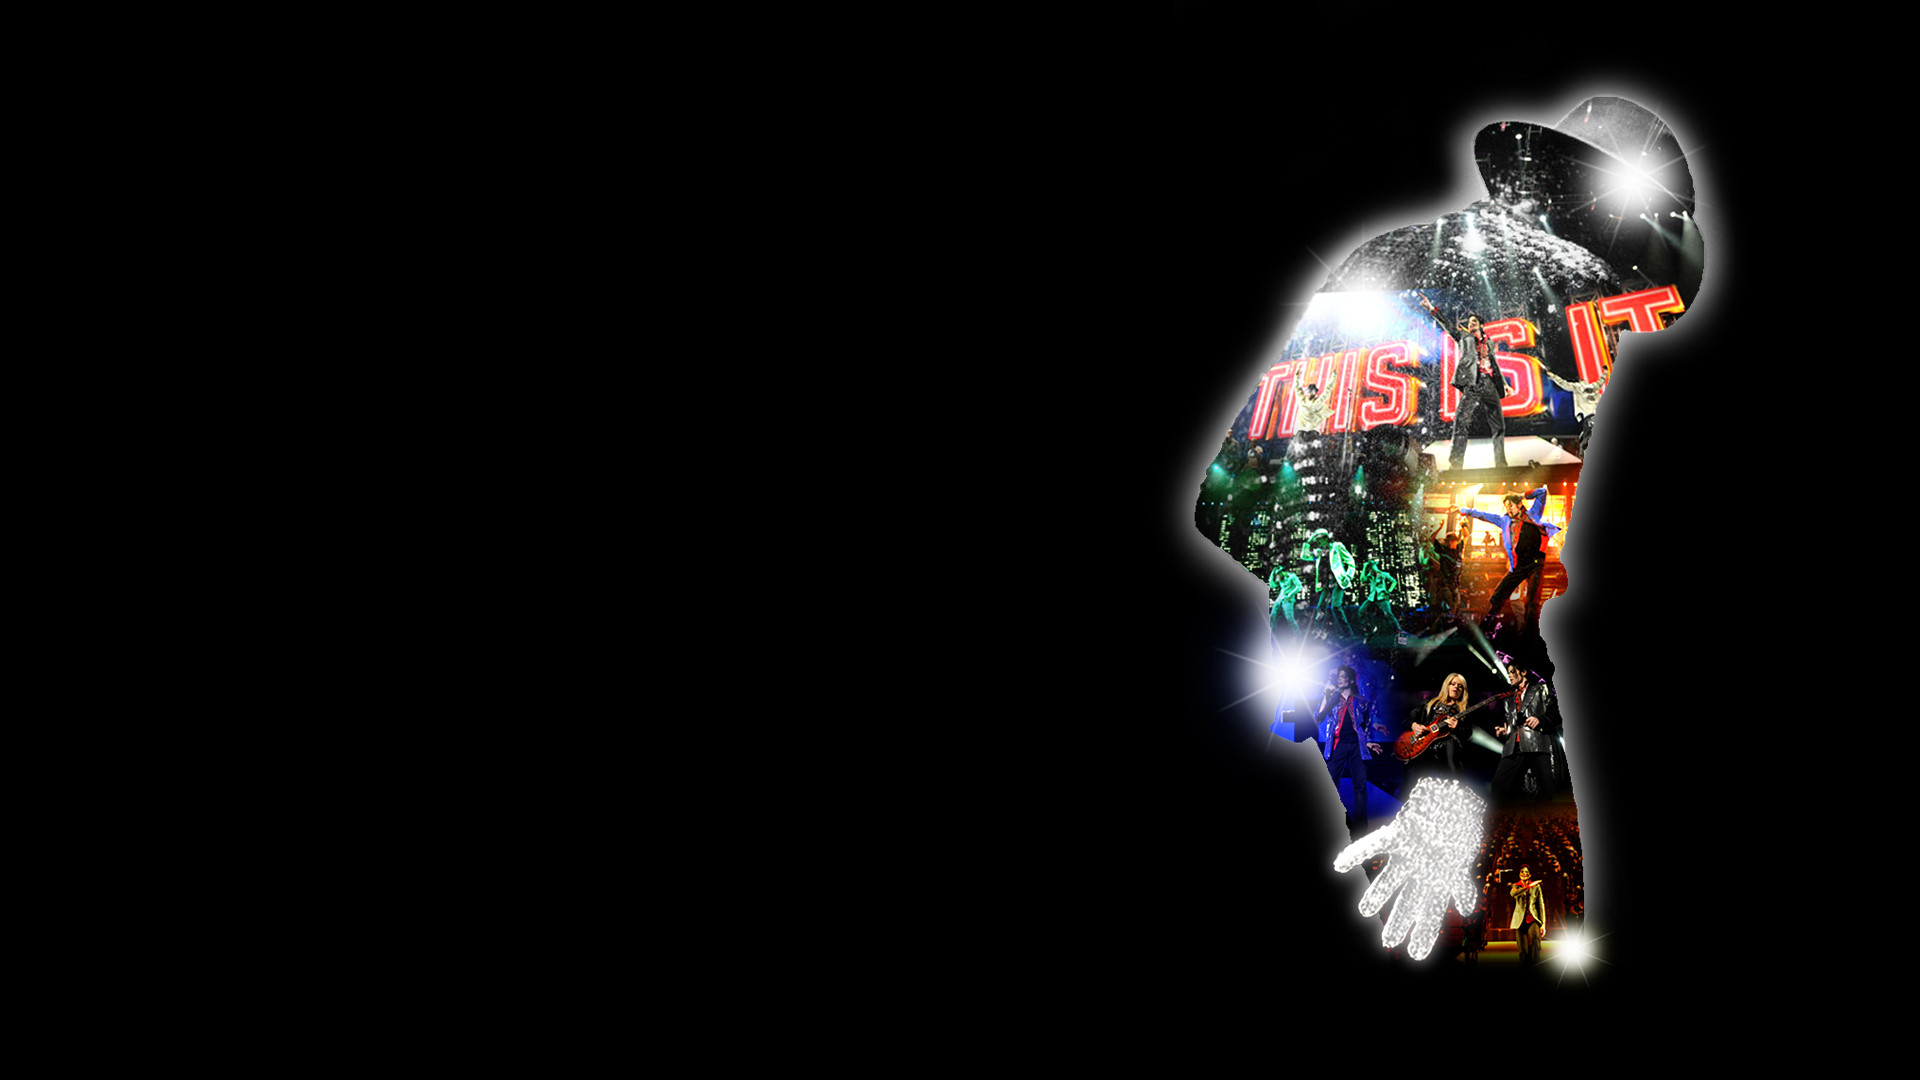 1920x1080 Michael Jackson images THIS IS IT-2 HD wallpaper and .